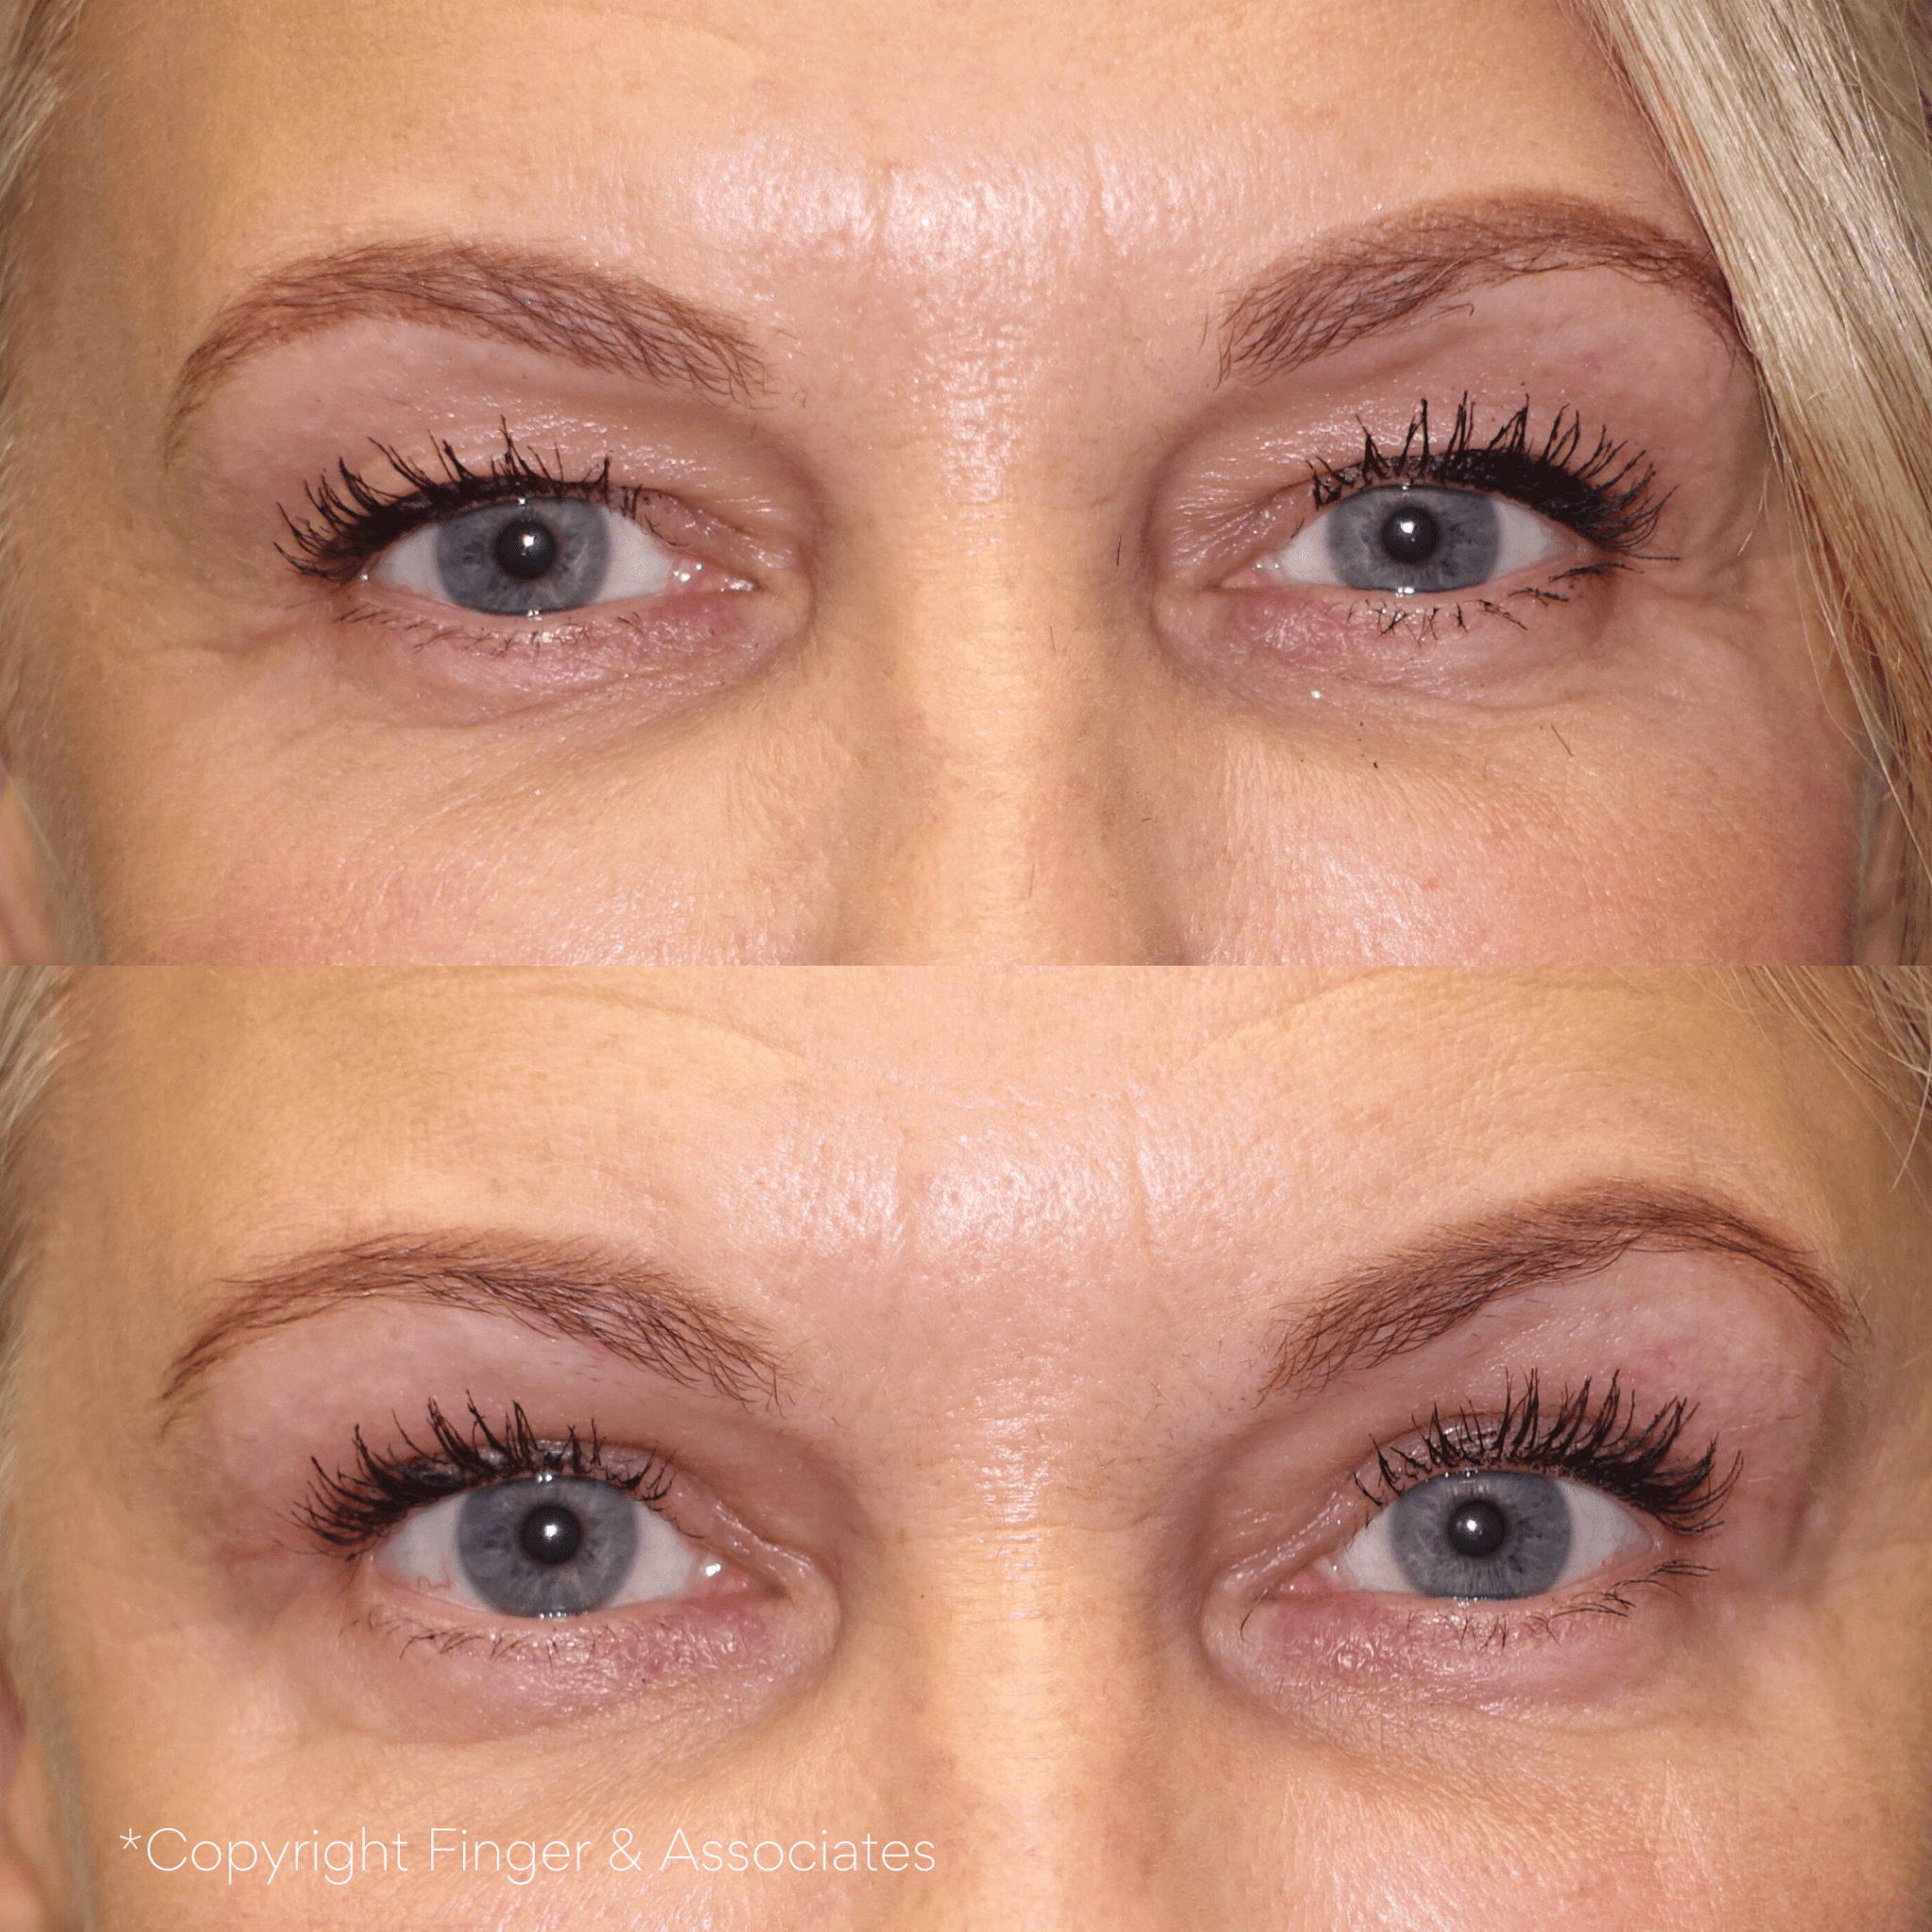 Before and after 4-month of receiving Blepharoplasty - upper eyelid lift